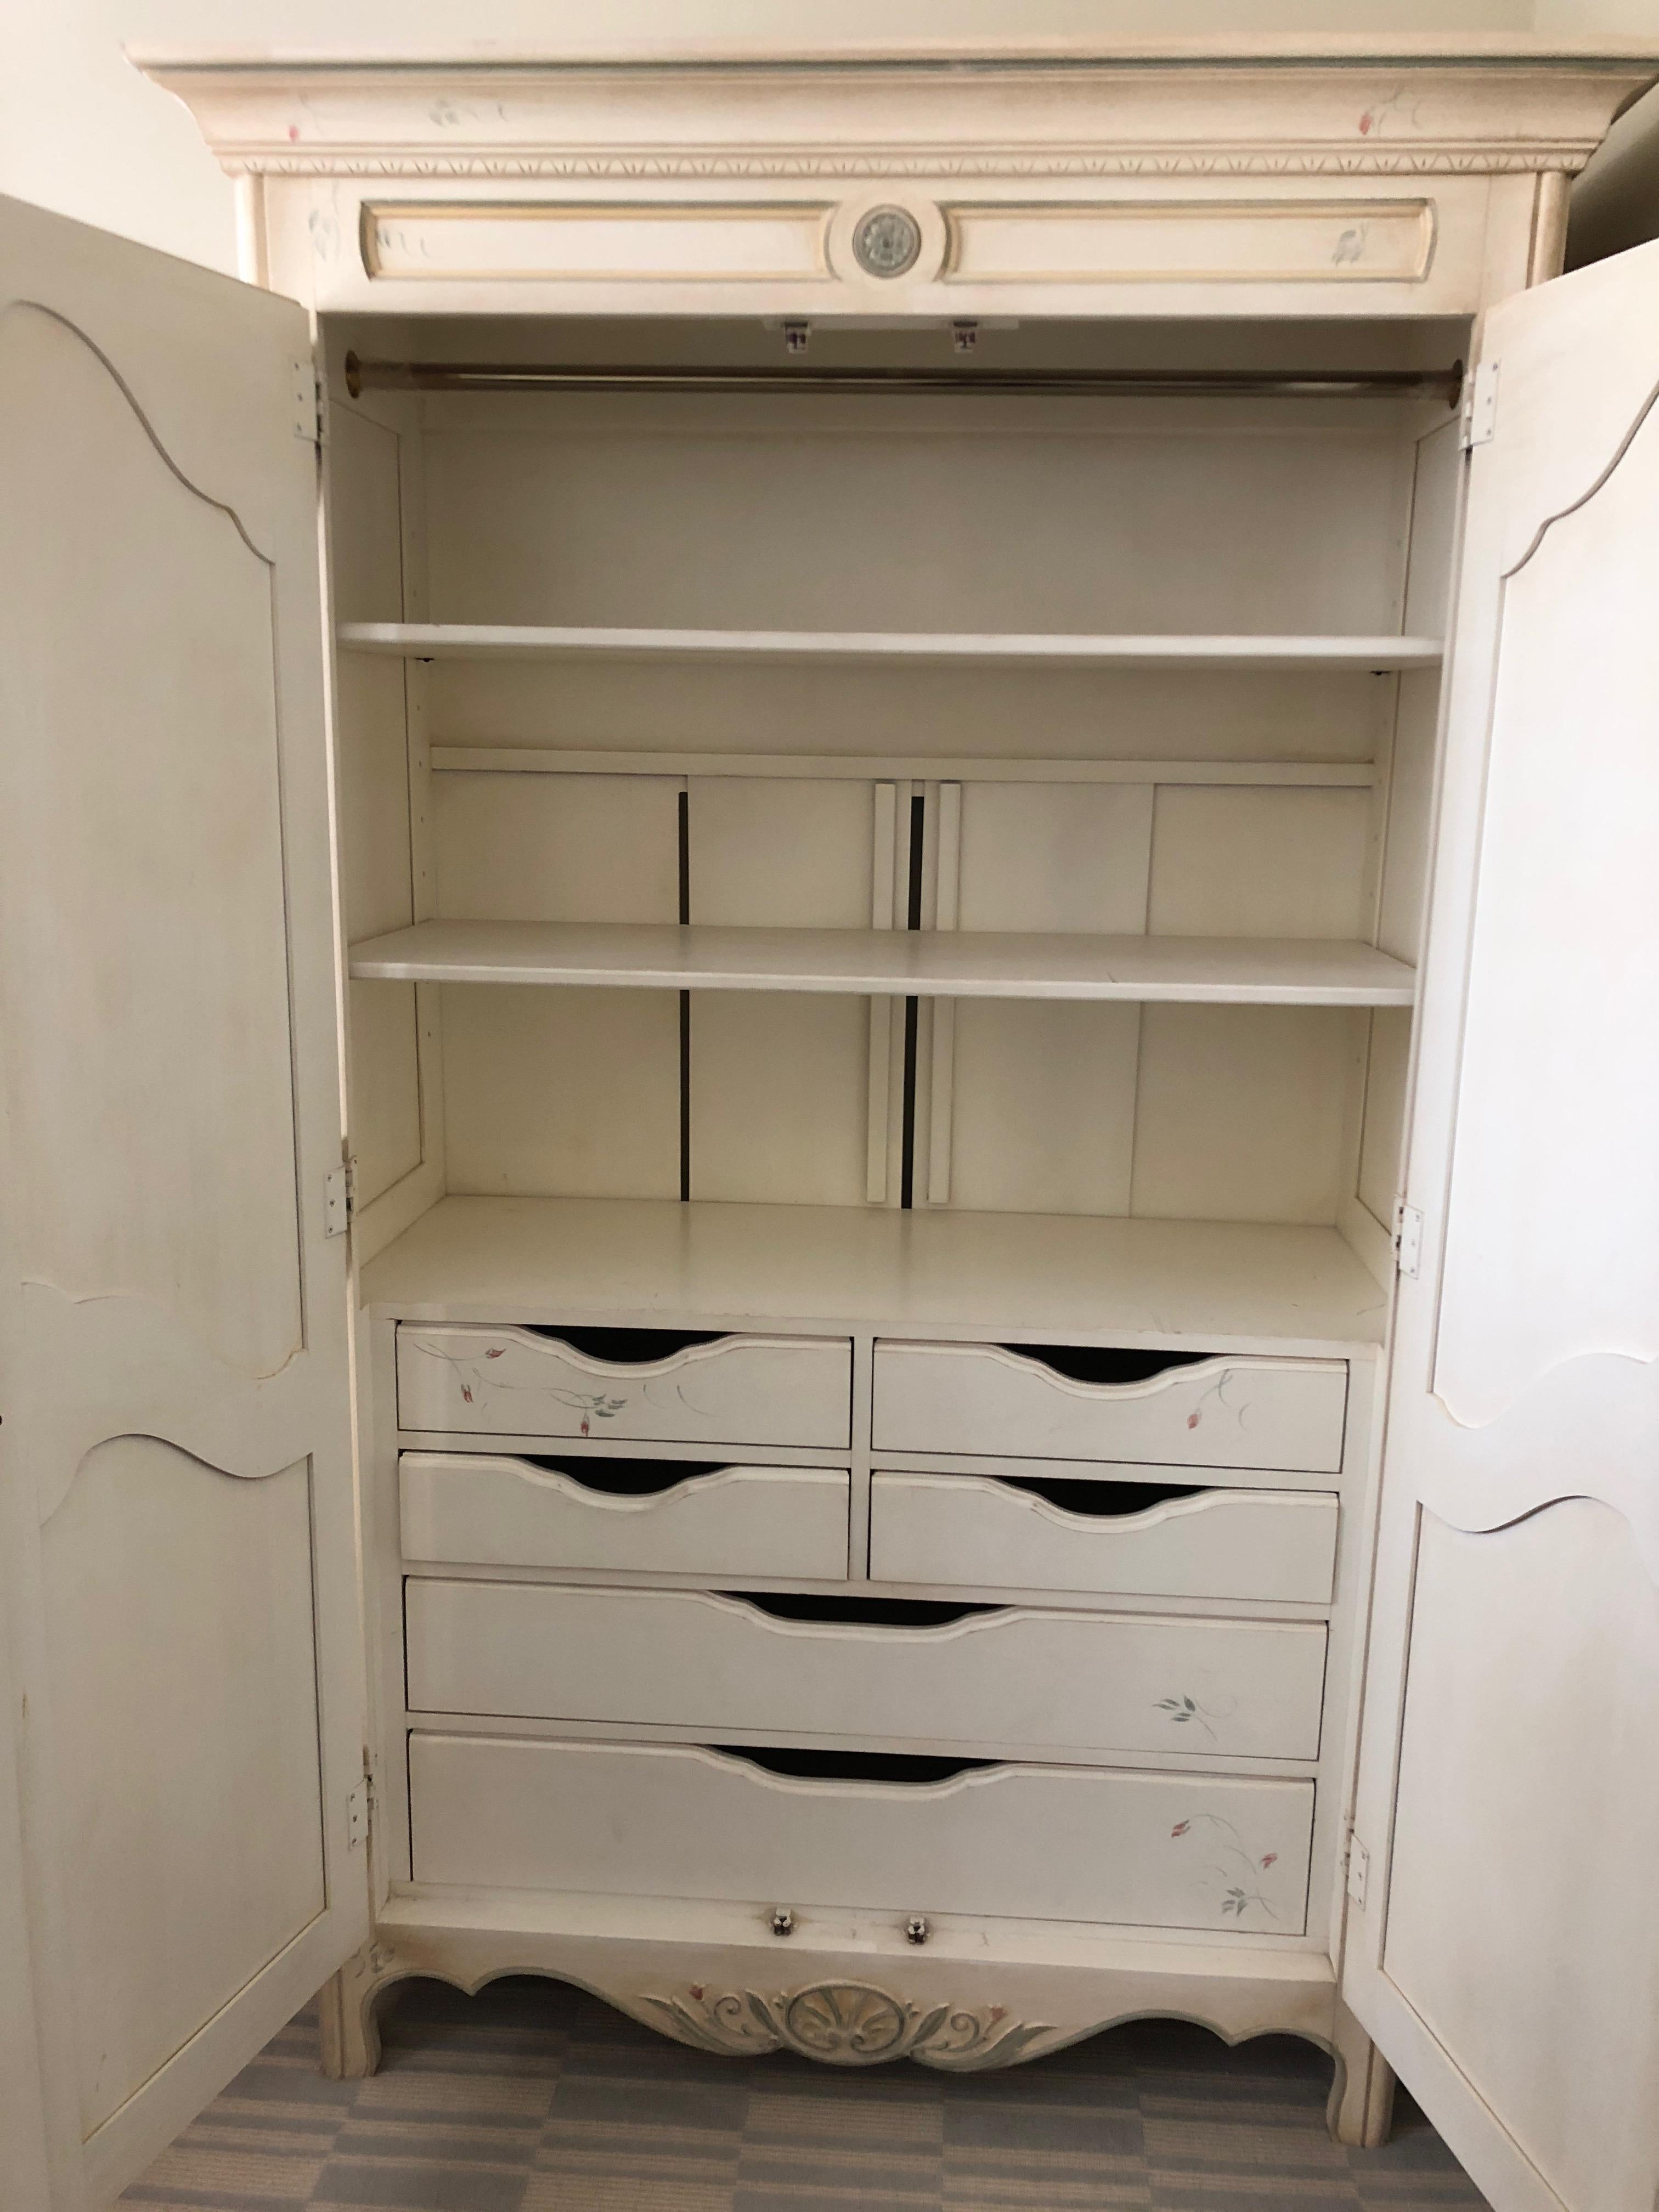 Versatile armoire by Ethan Allen painted with a floral pastel motif against off white background, having drawers inside and a dowel for hanging clothes. The back panels separate to allow electronic equipment wires through for TV or stereo storage.